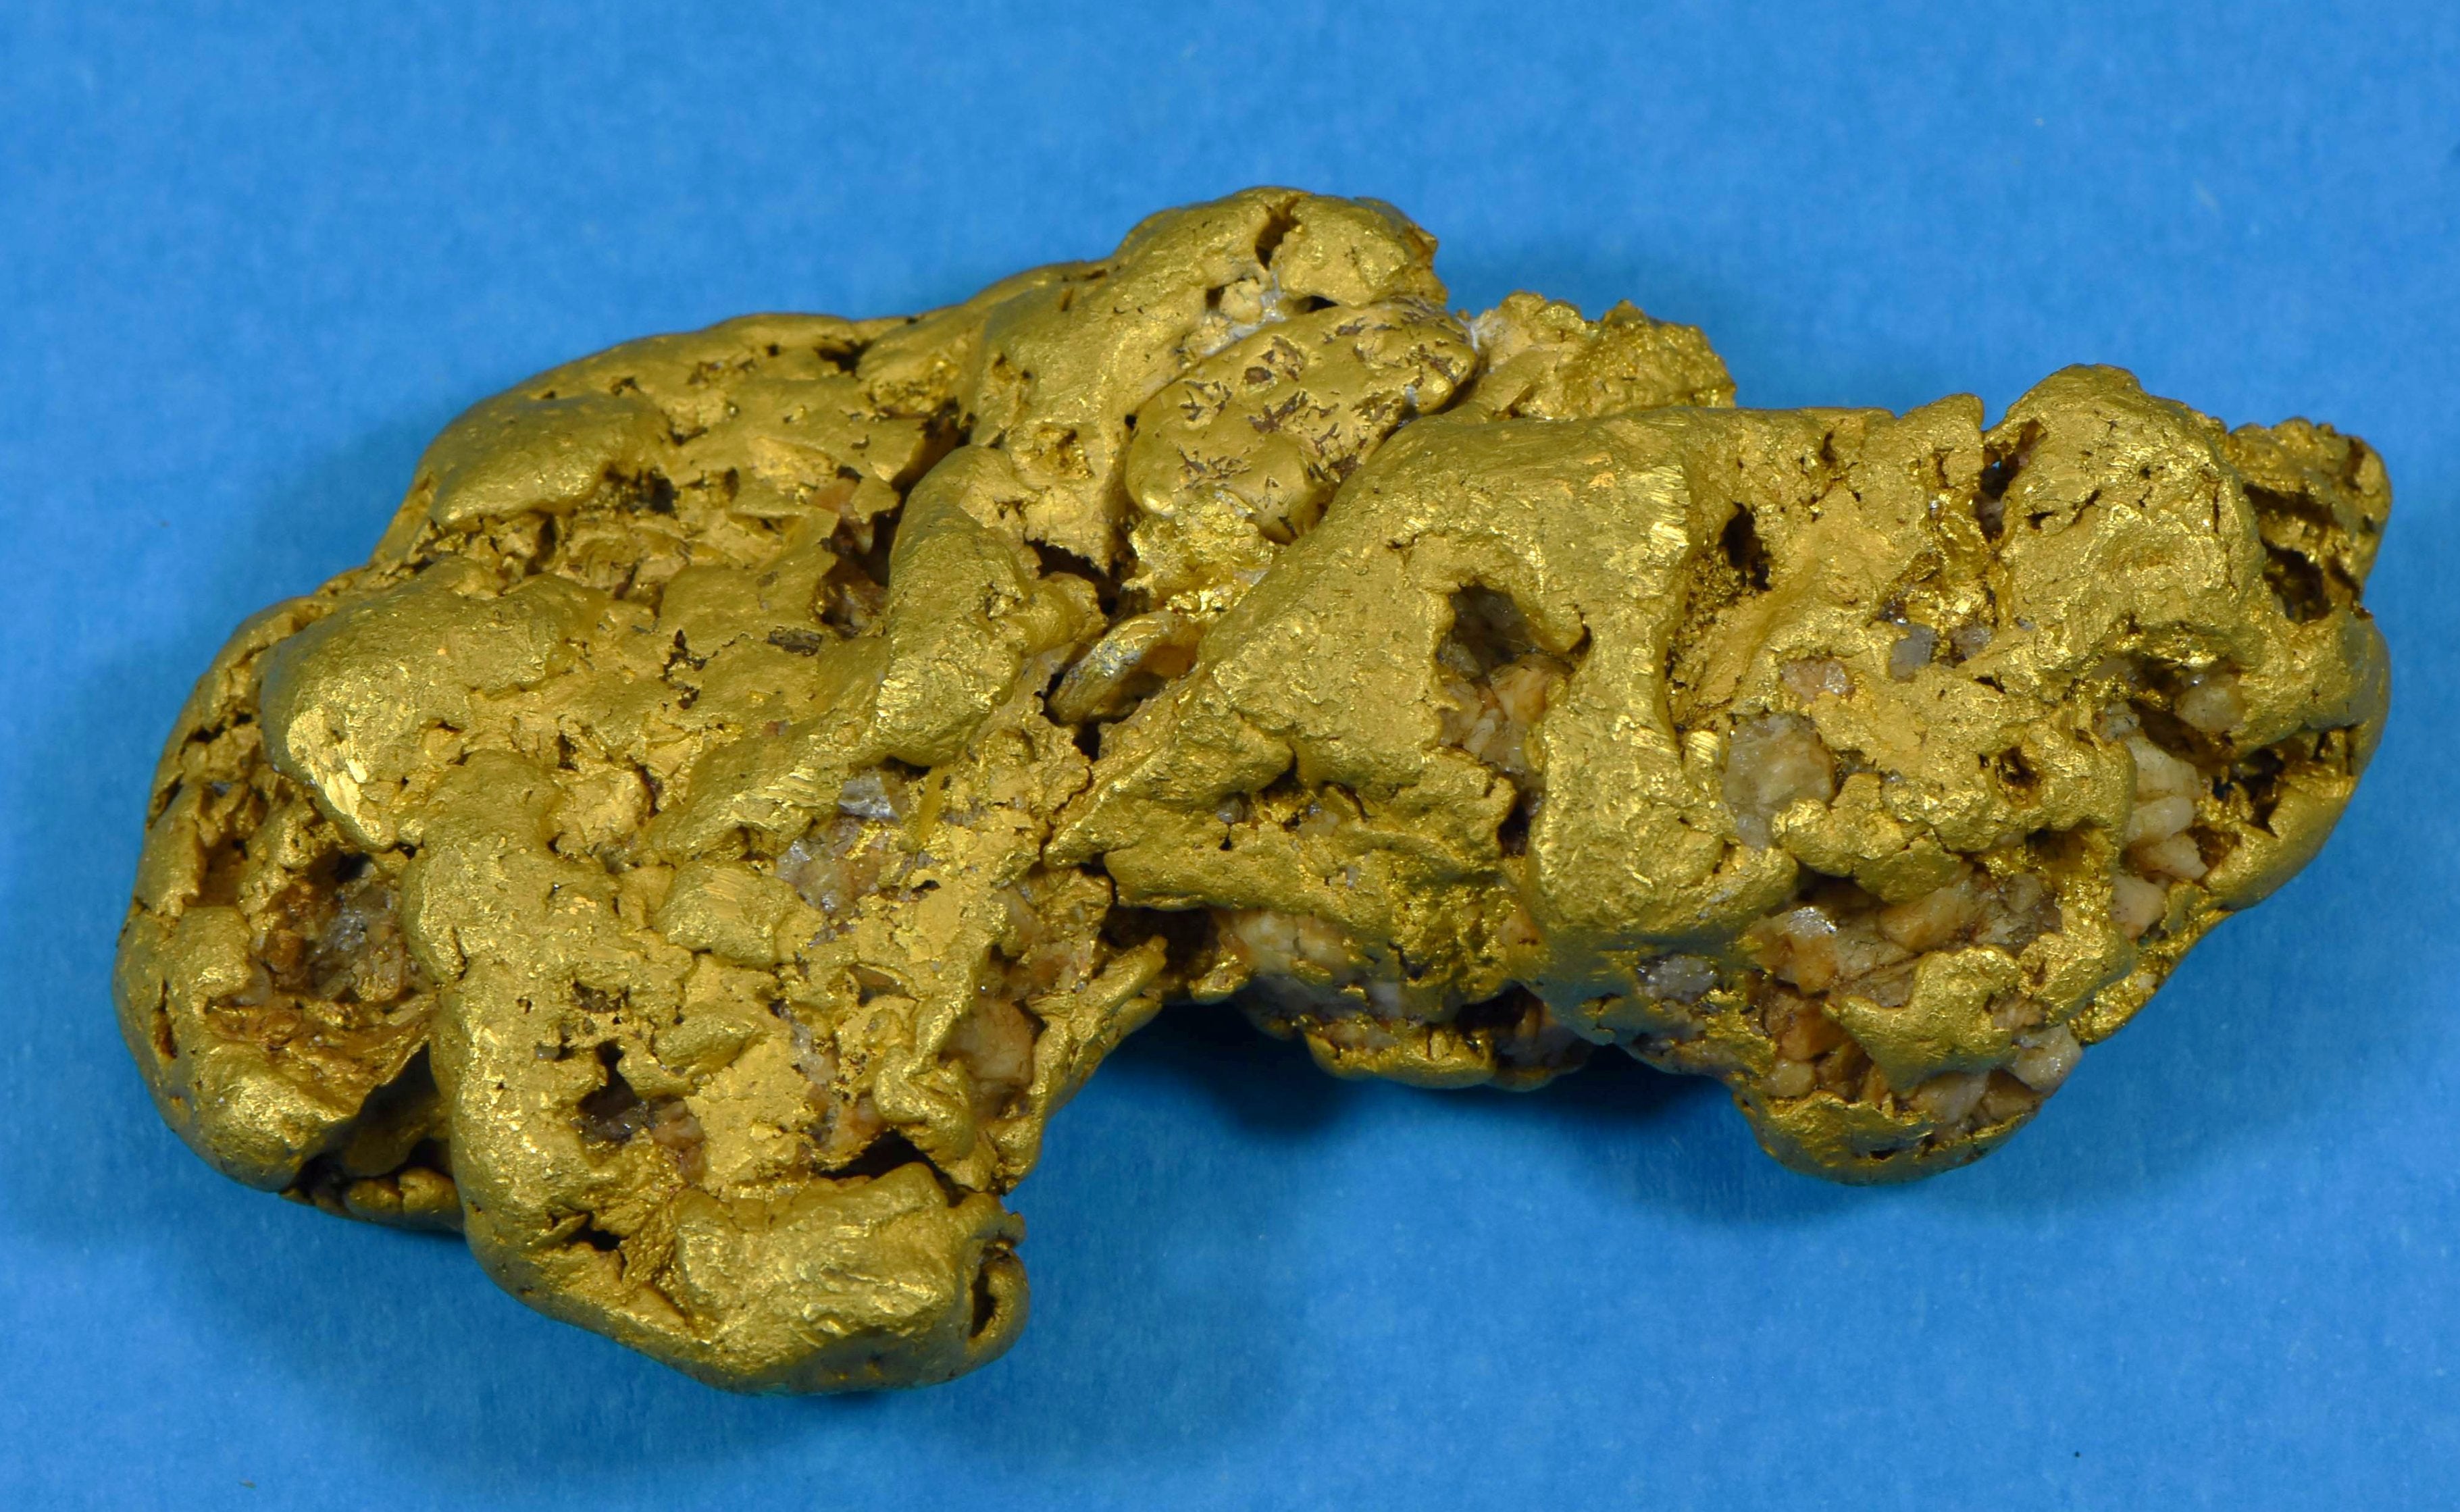 Natural Gold Nuggets For Sale  High Purity, Satisfaction Guaranteed!